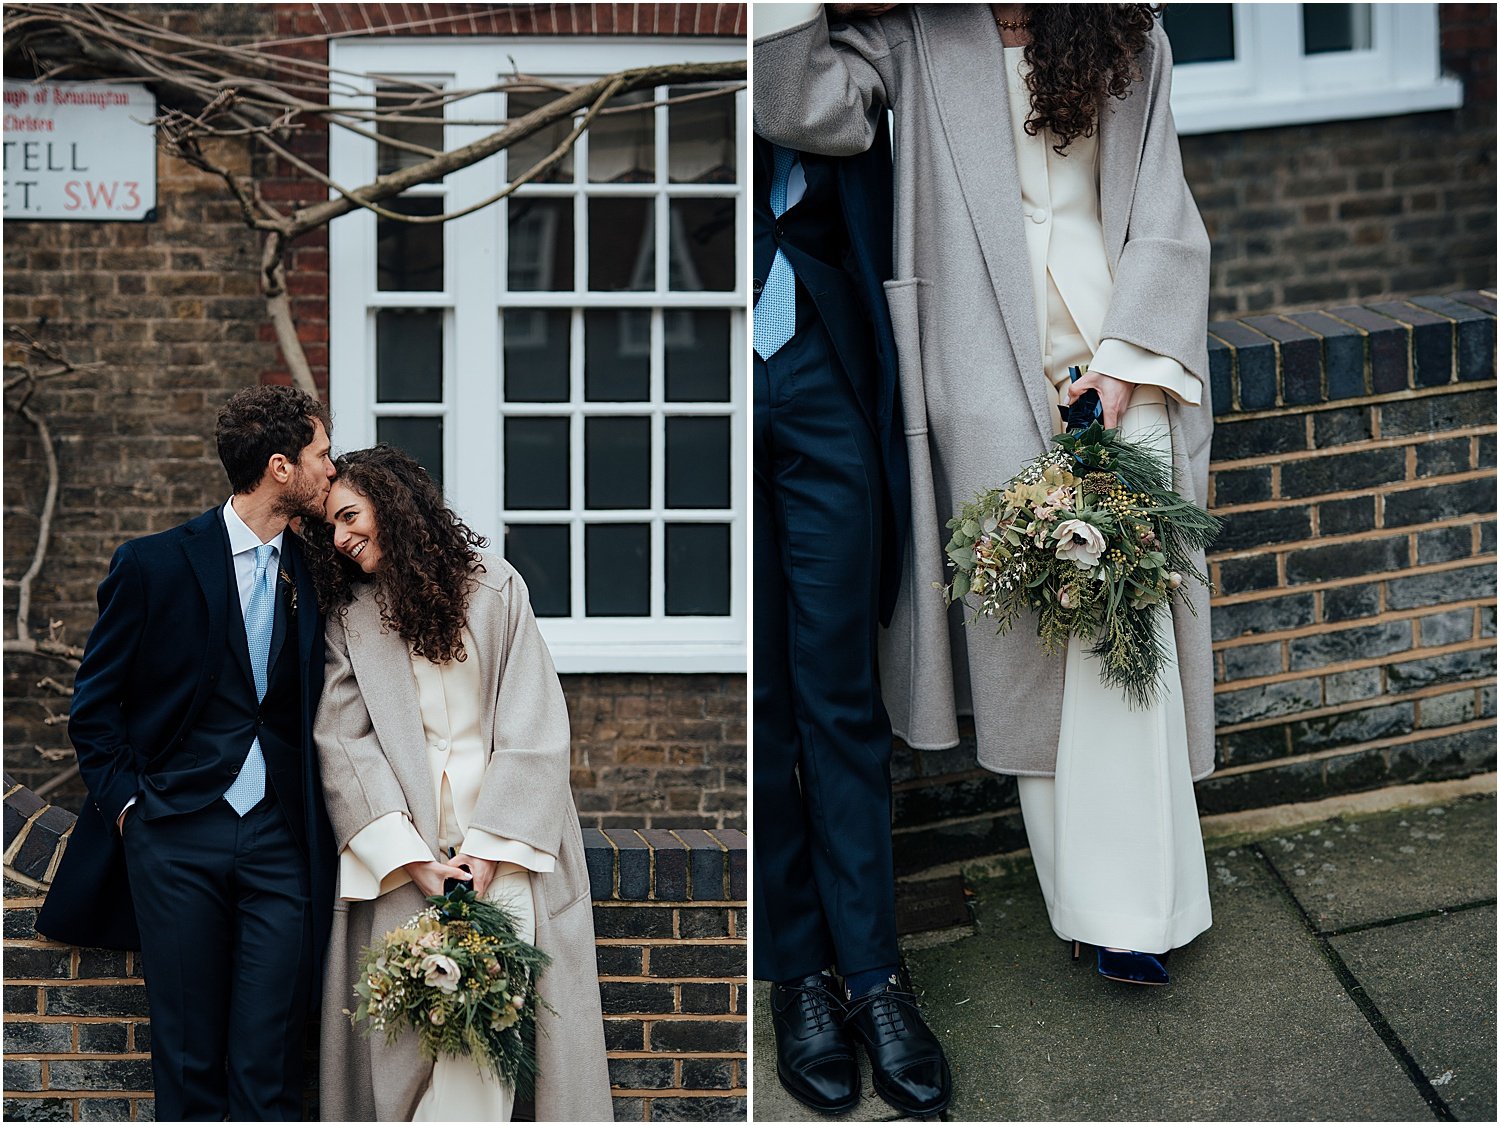 Candid wedding photo in Chelsea in winter